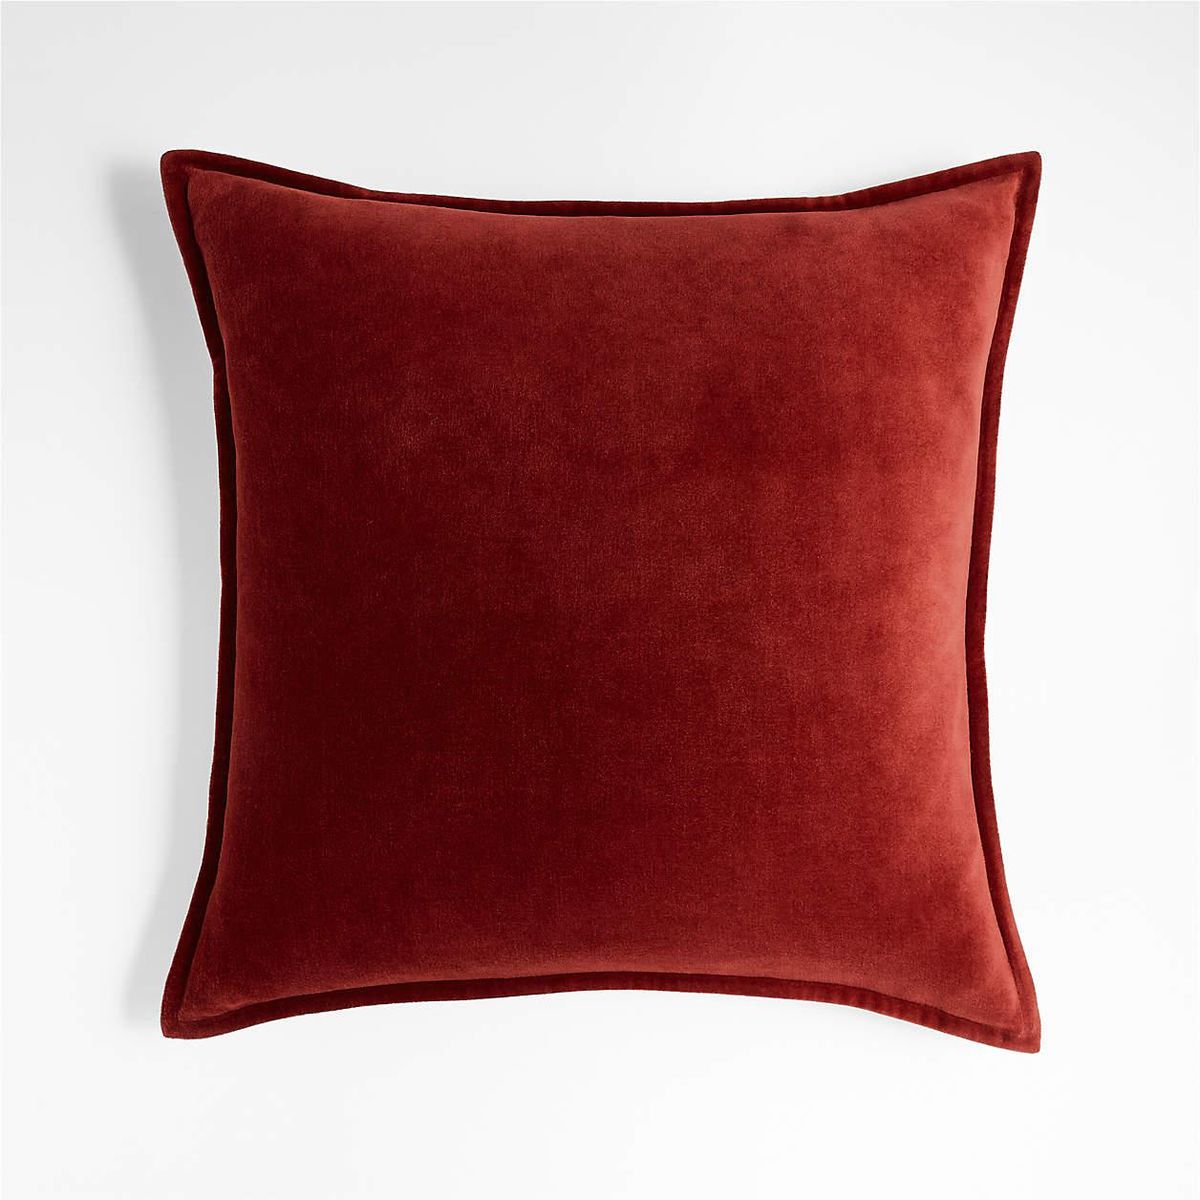 Brick 20 Washed Cotton Velvet Pillow Cover